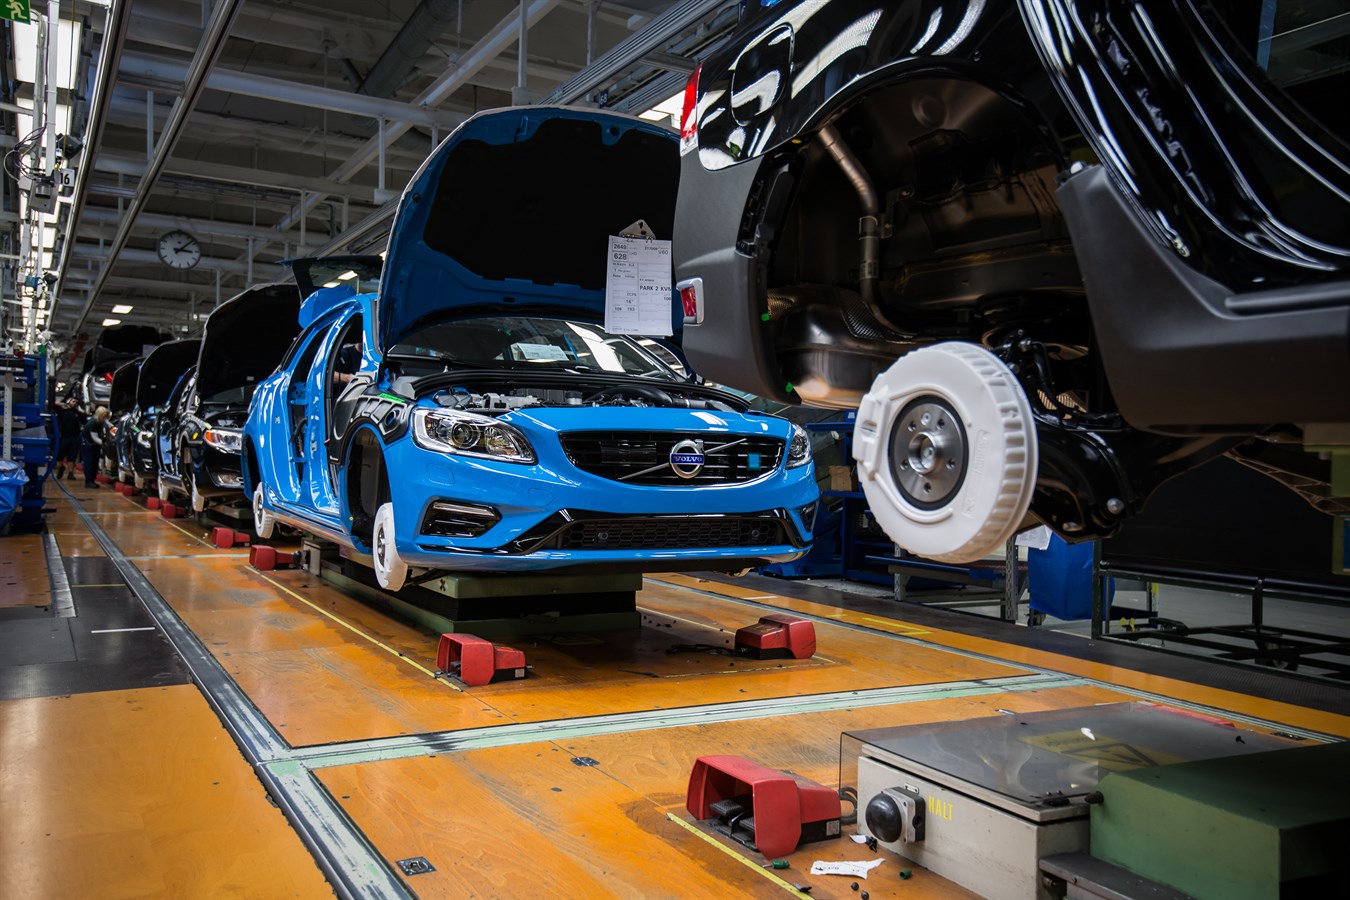 Volvo Cars starts production of the new Volvo S60 and V60 Polestar